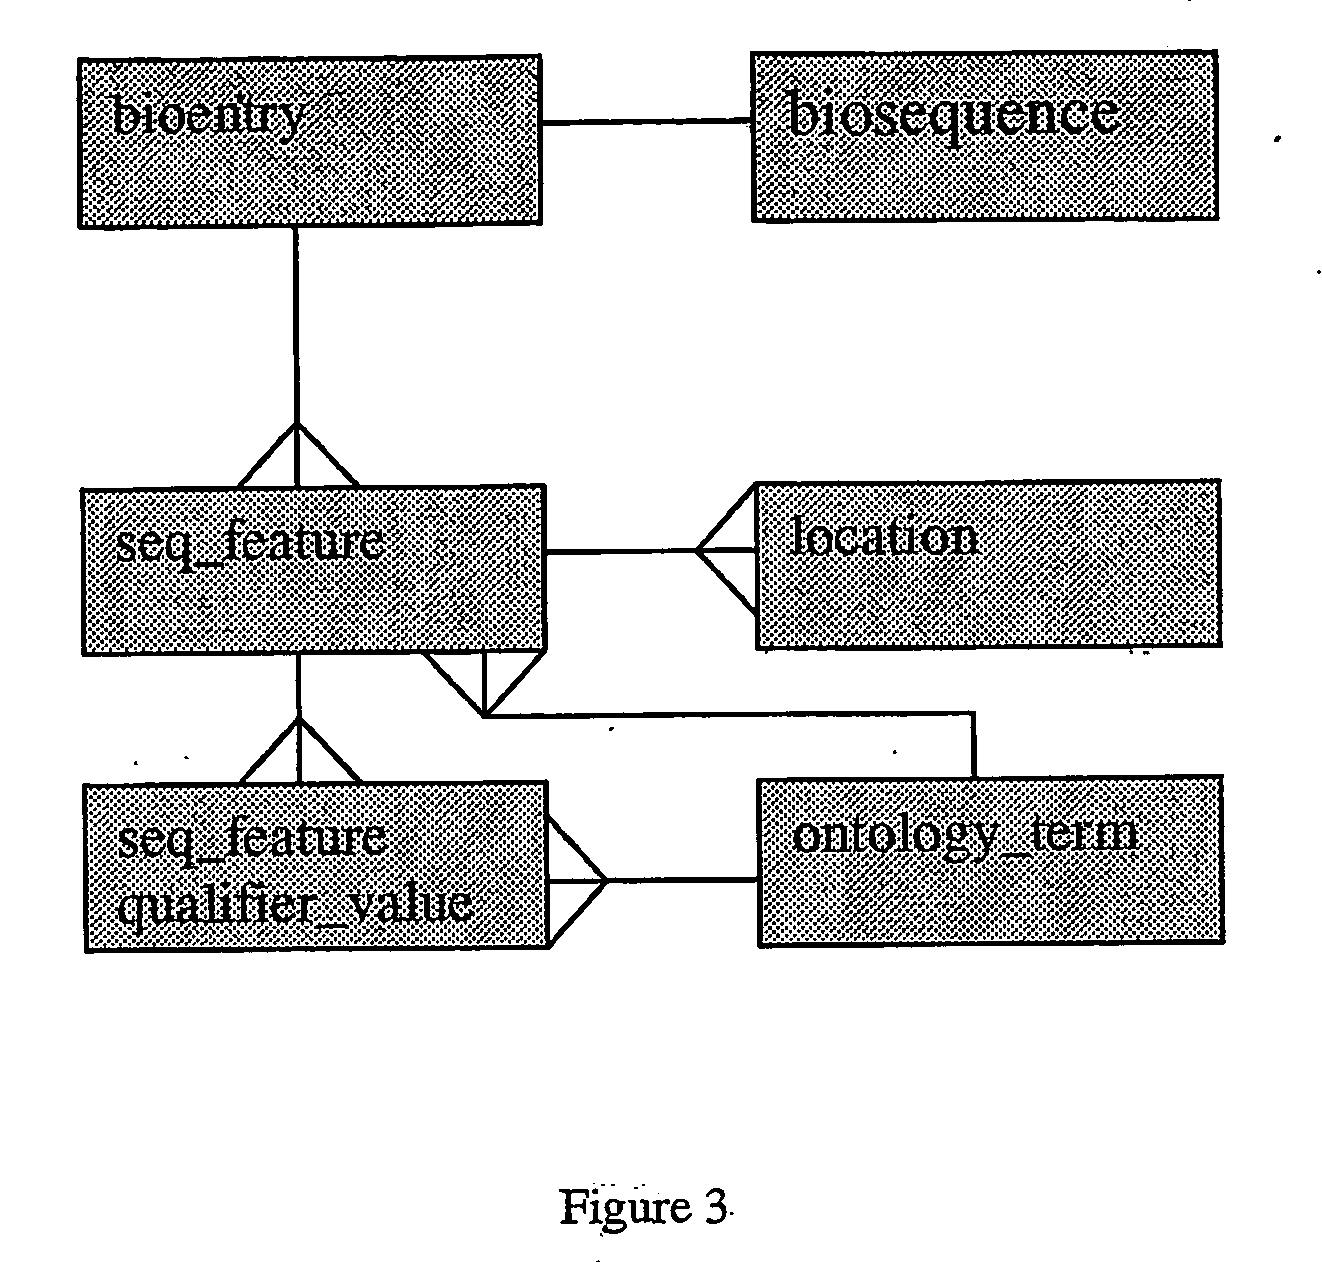 Methods of selection, reporting and analysis of genetic markers using borad-based genetic profiling applications